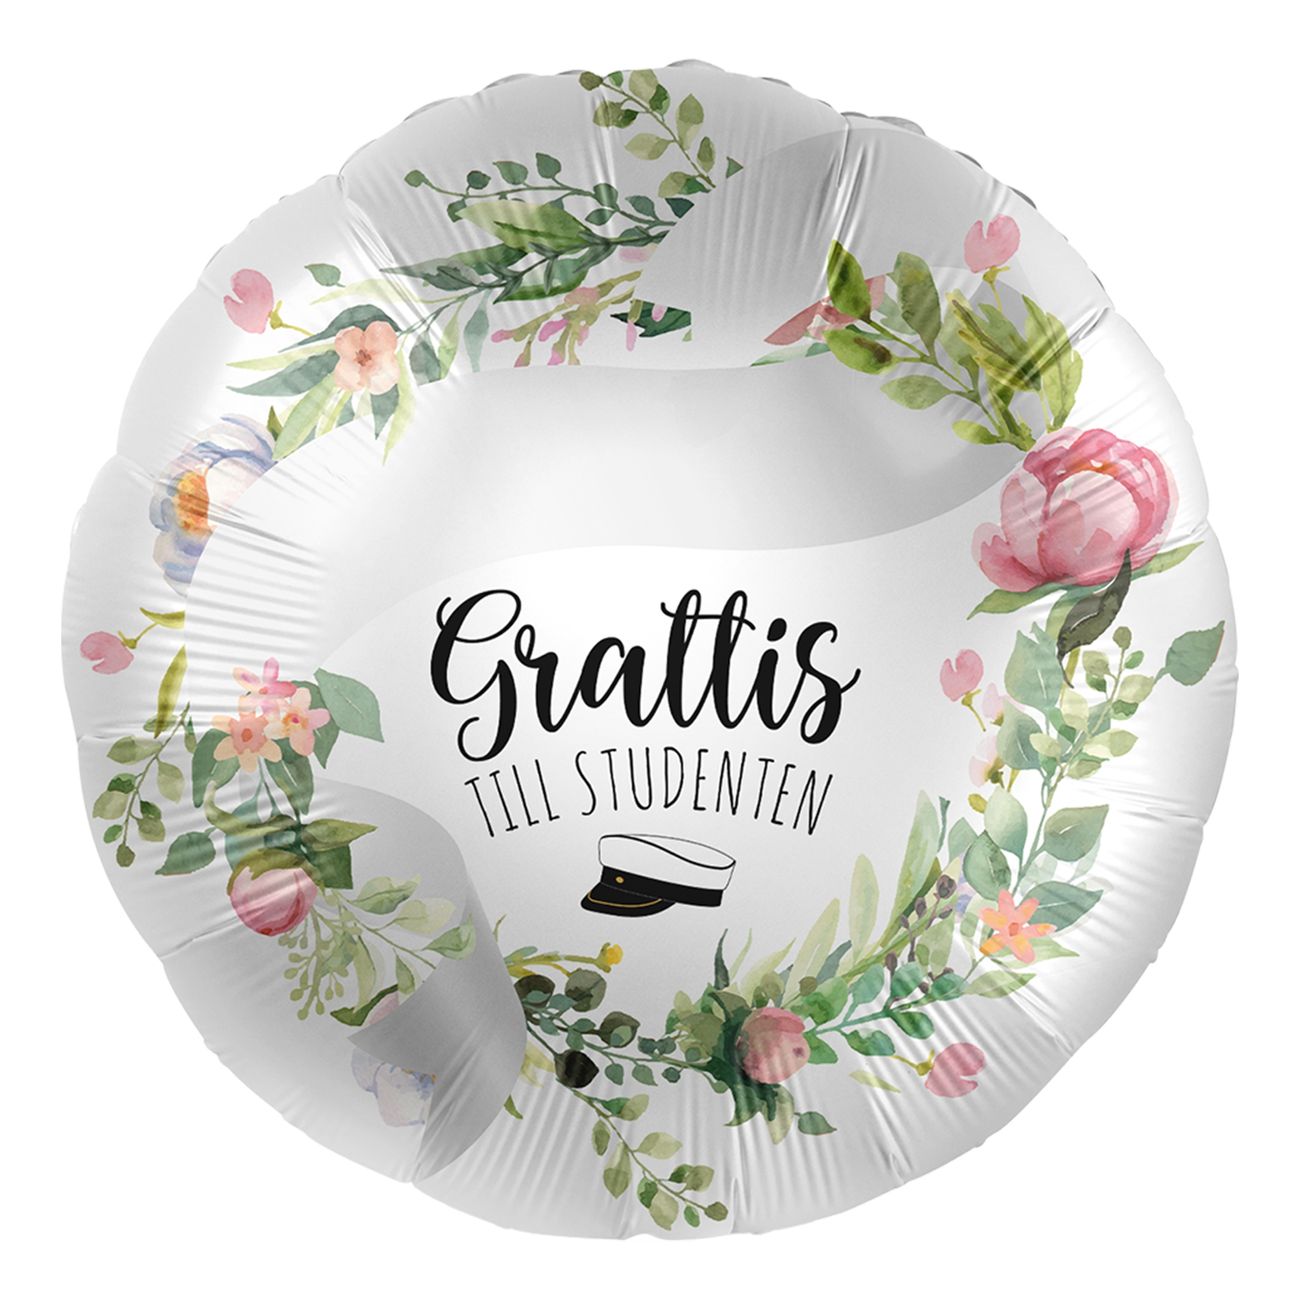 1-balloon-personalize-it-blooming-student-swe-91886-2